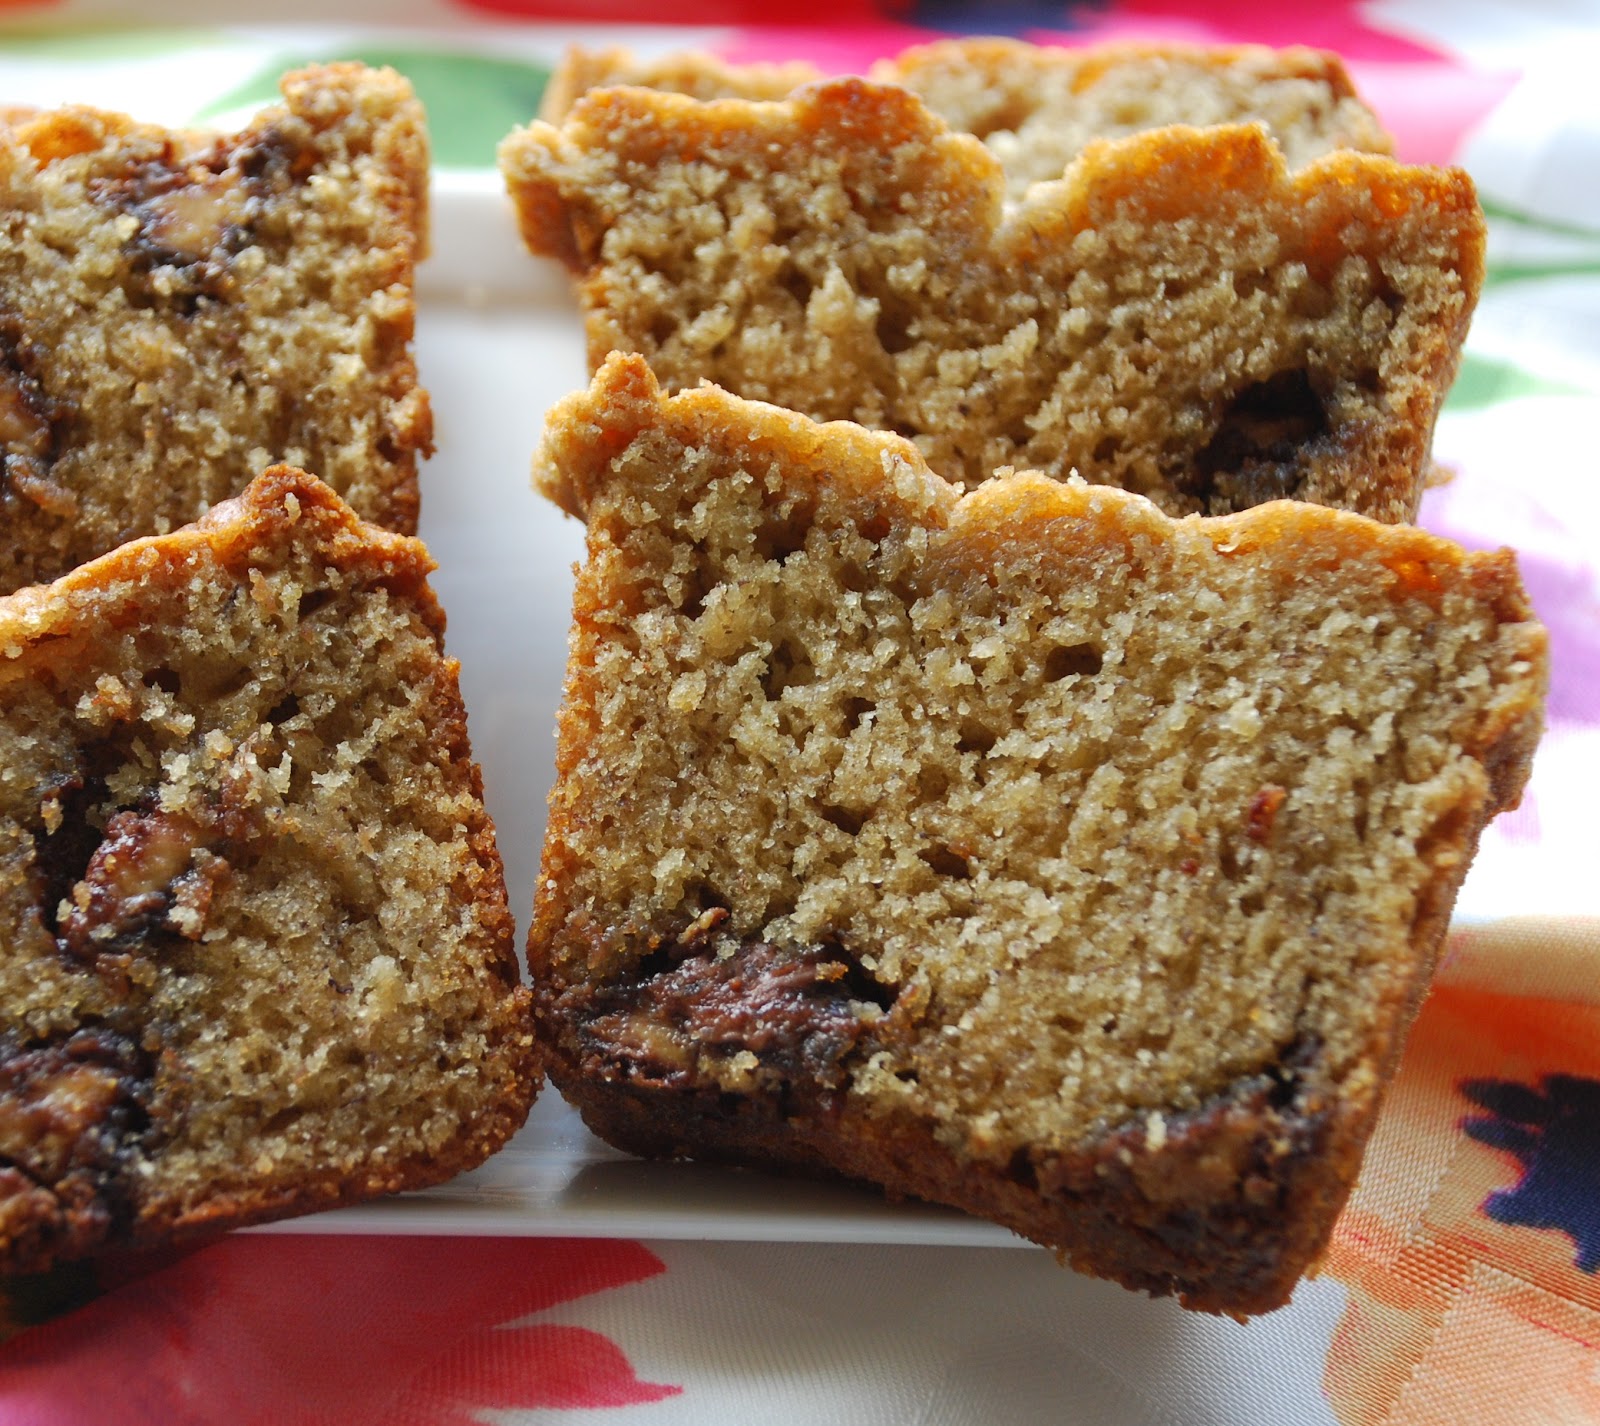 Everyday Insanity...: Reese's Mini Peanut Butter Cup Banana Bread